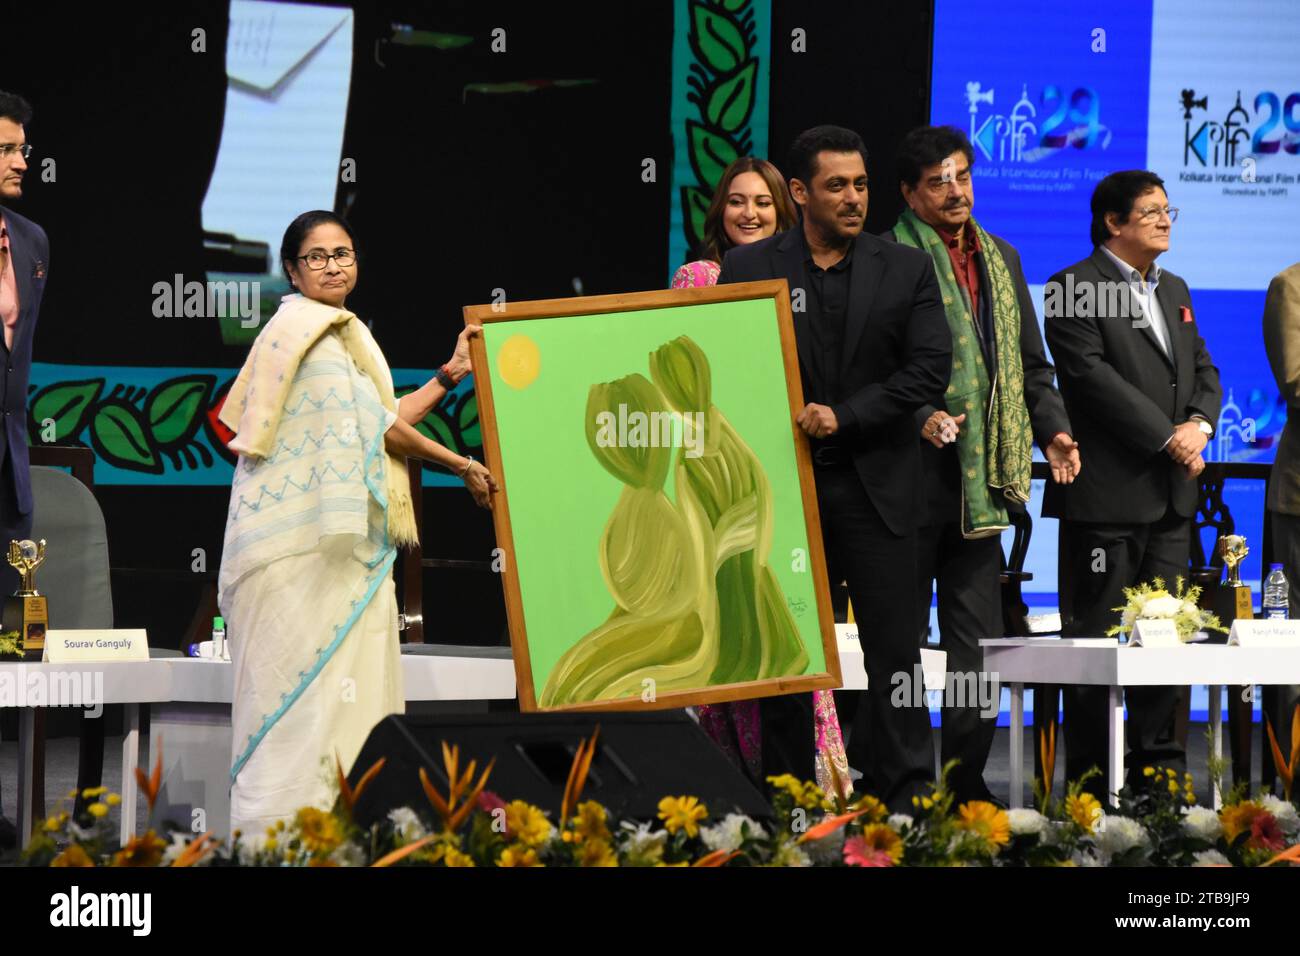 Mamata Banerjee, Chief Minister of West Bengal, presenting her painting to Bollywood star actor Salman Khan at the iaugural function of the 29th edition of the Kolkata International Film Festival (KIFF 29), organized by the Information and Cultural Affairs Department, Government of West Bengal, which is scheduled to be held between 5 - 12 December, 2023 in Kolkata, the cultural capital of the State of West Bengal. this festival is accredited by the International Federation of Film Producers' Association or FIAPF. (Photo by Biswarup Ganguly/Pacific Press) Stock Photo